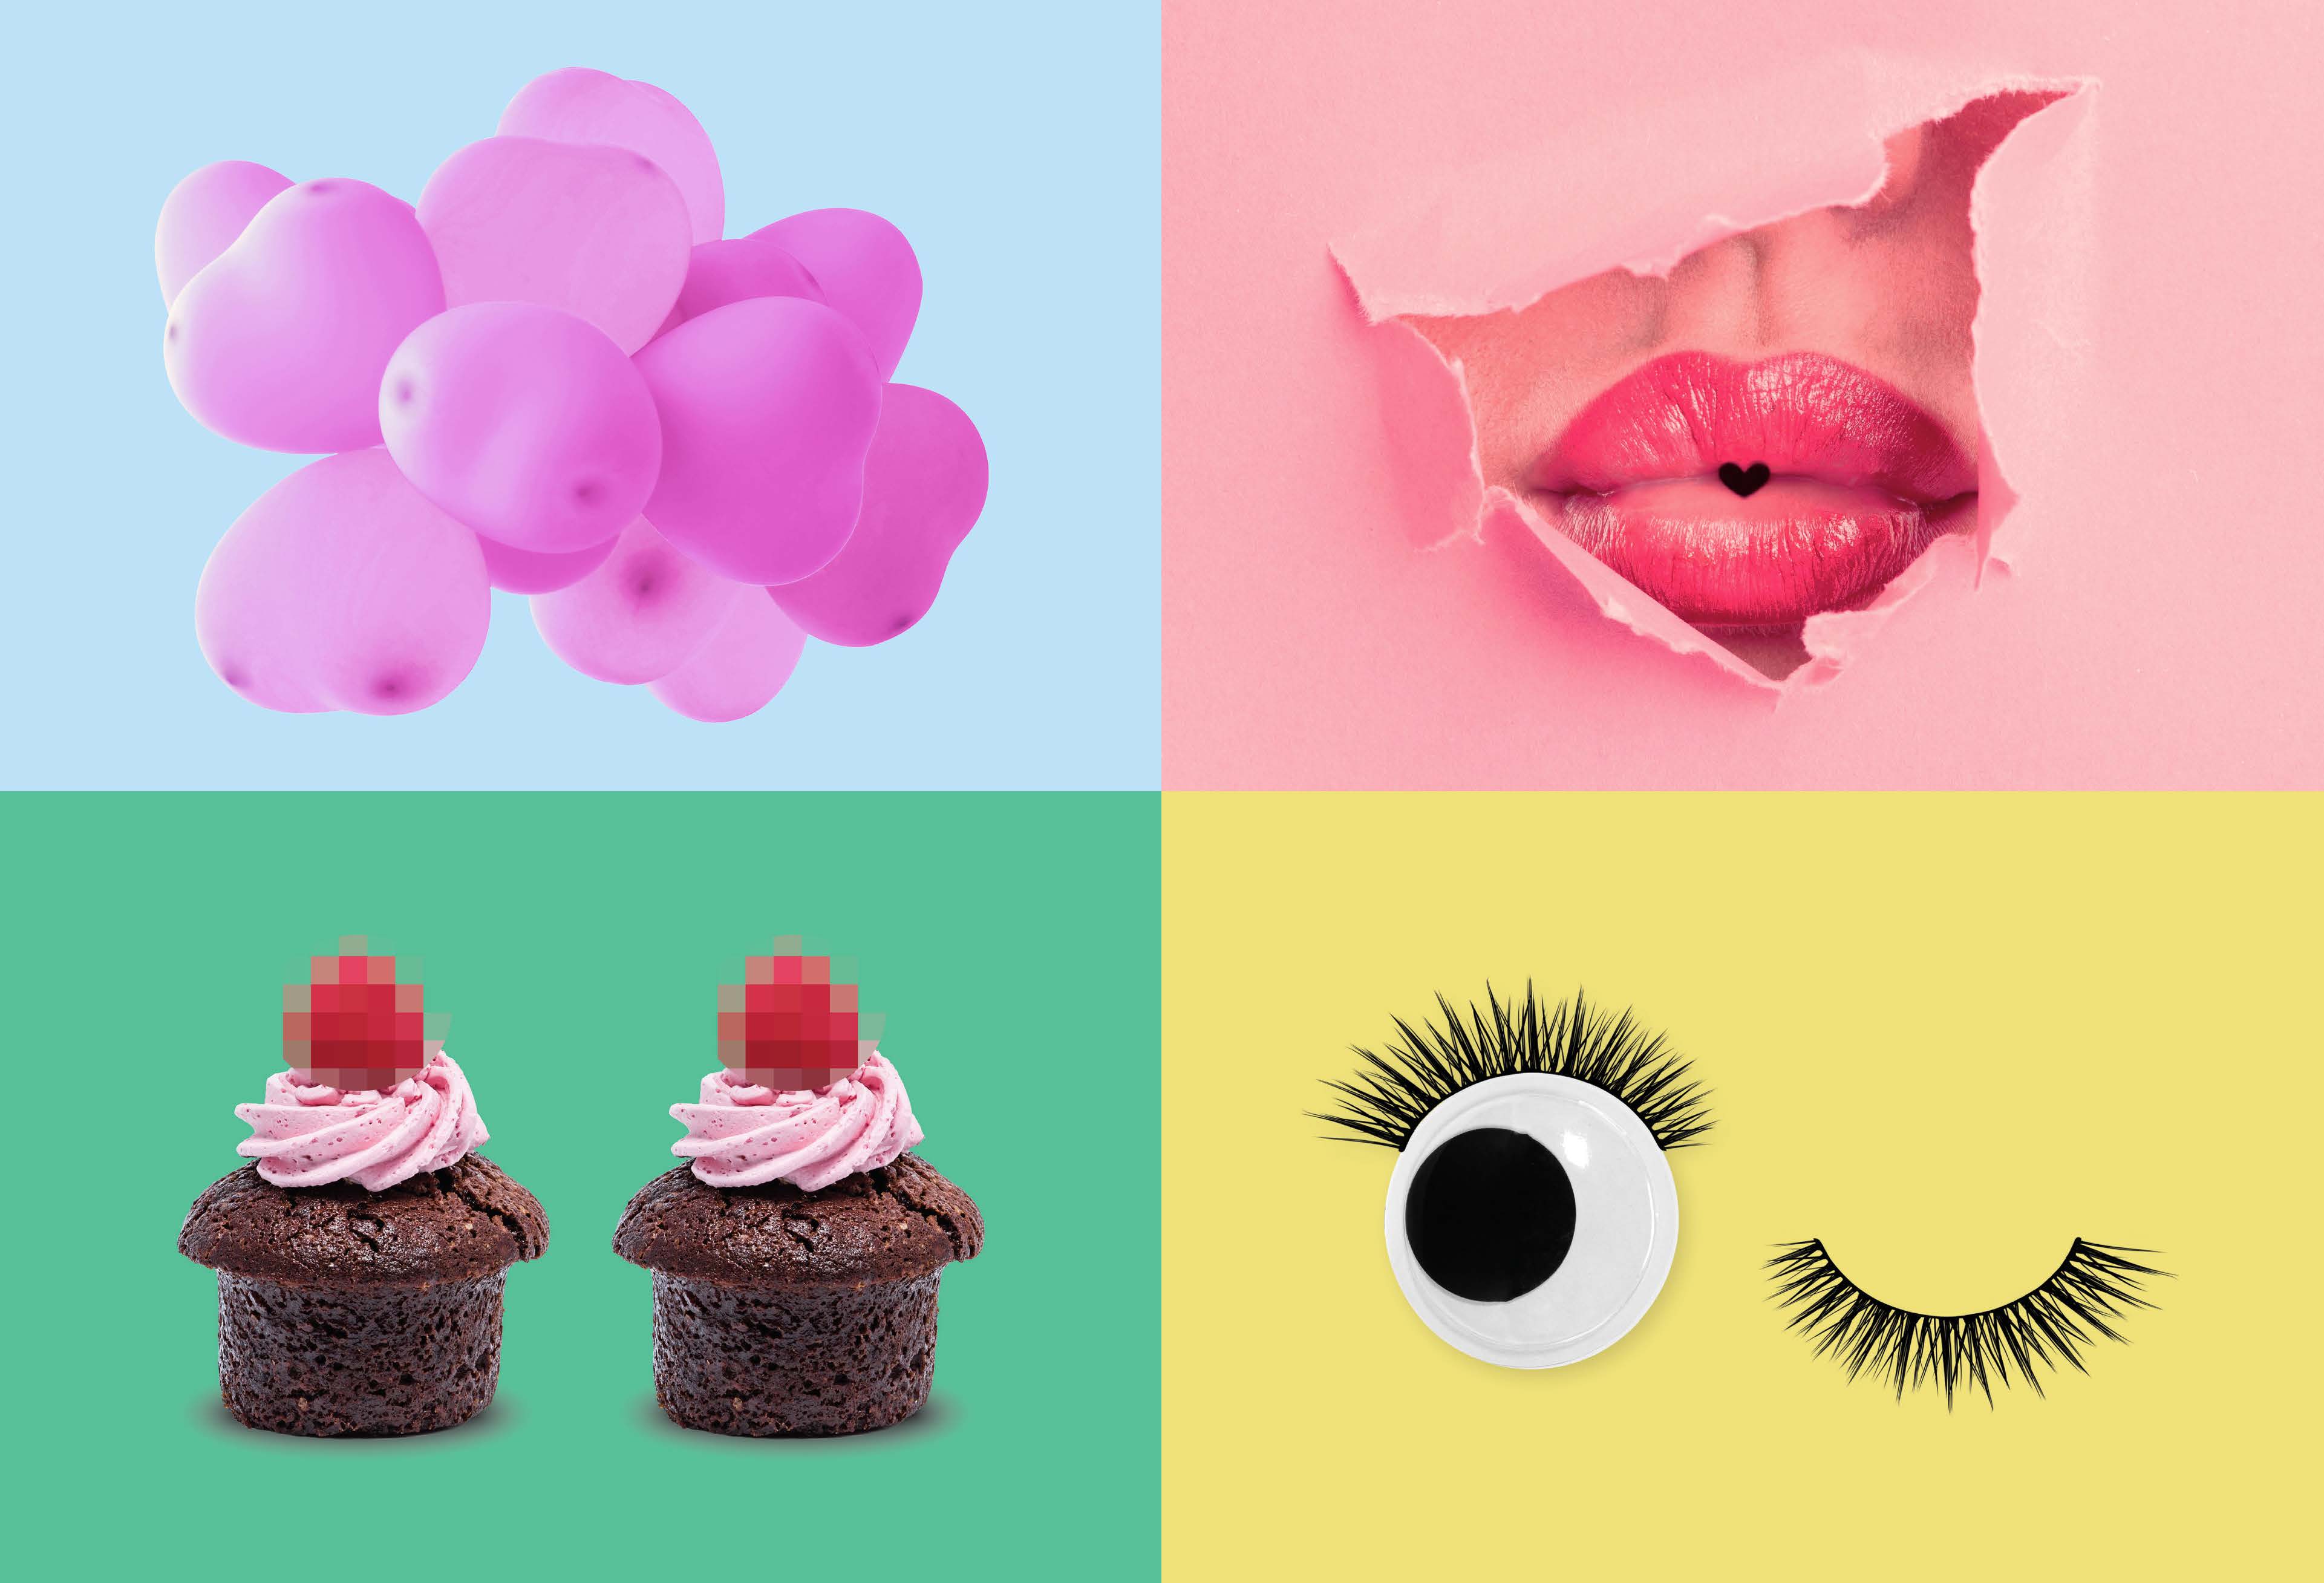 A set of four images depictig: some pink heart shapes on a cyan board, a woman's red lips emerging from a pink wall, a couple of brownies with pink and red toppings on a green board, a pair of open and closed cartoon eyes on a yellow board.